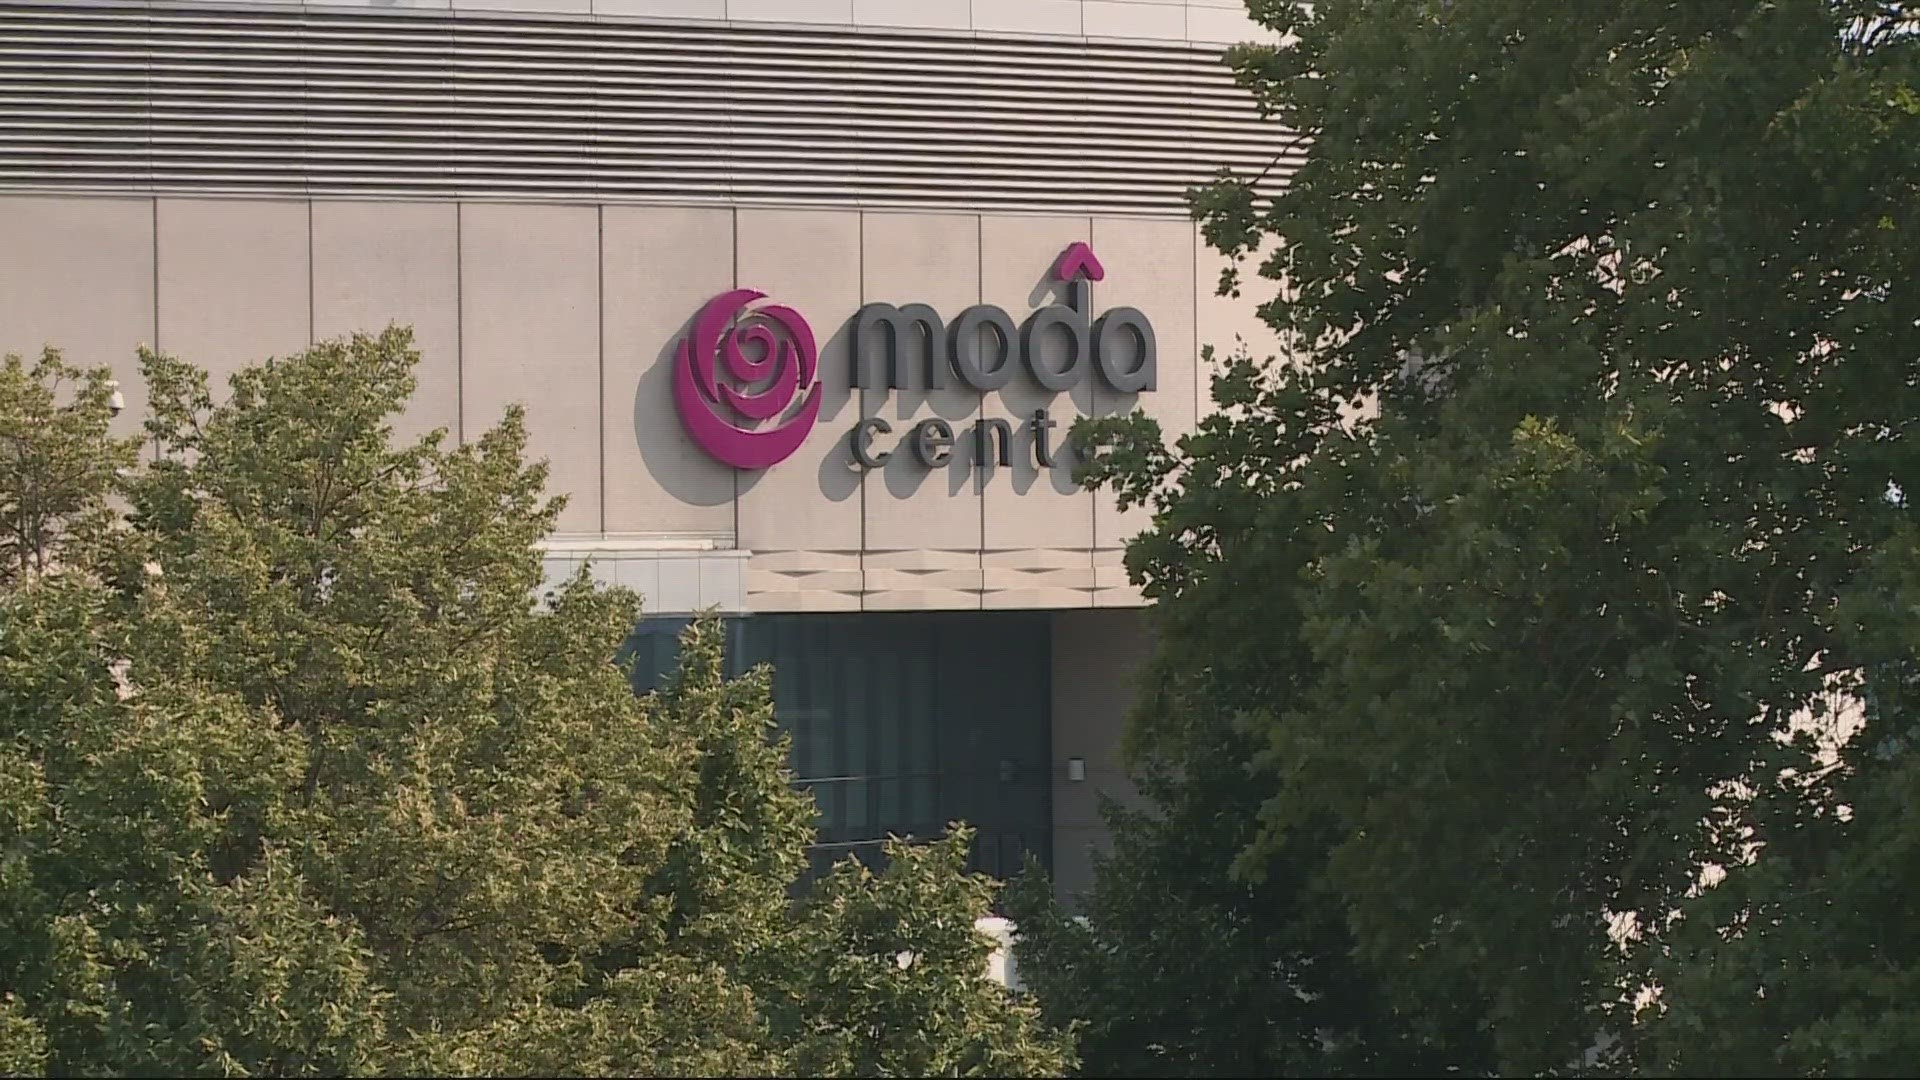 The plaintiff was selling tickets outside the Moda Center during the alleged incident and is suing for $750,000.